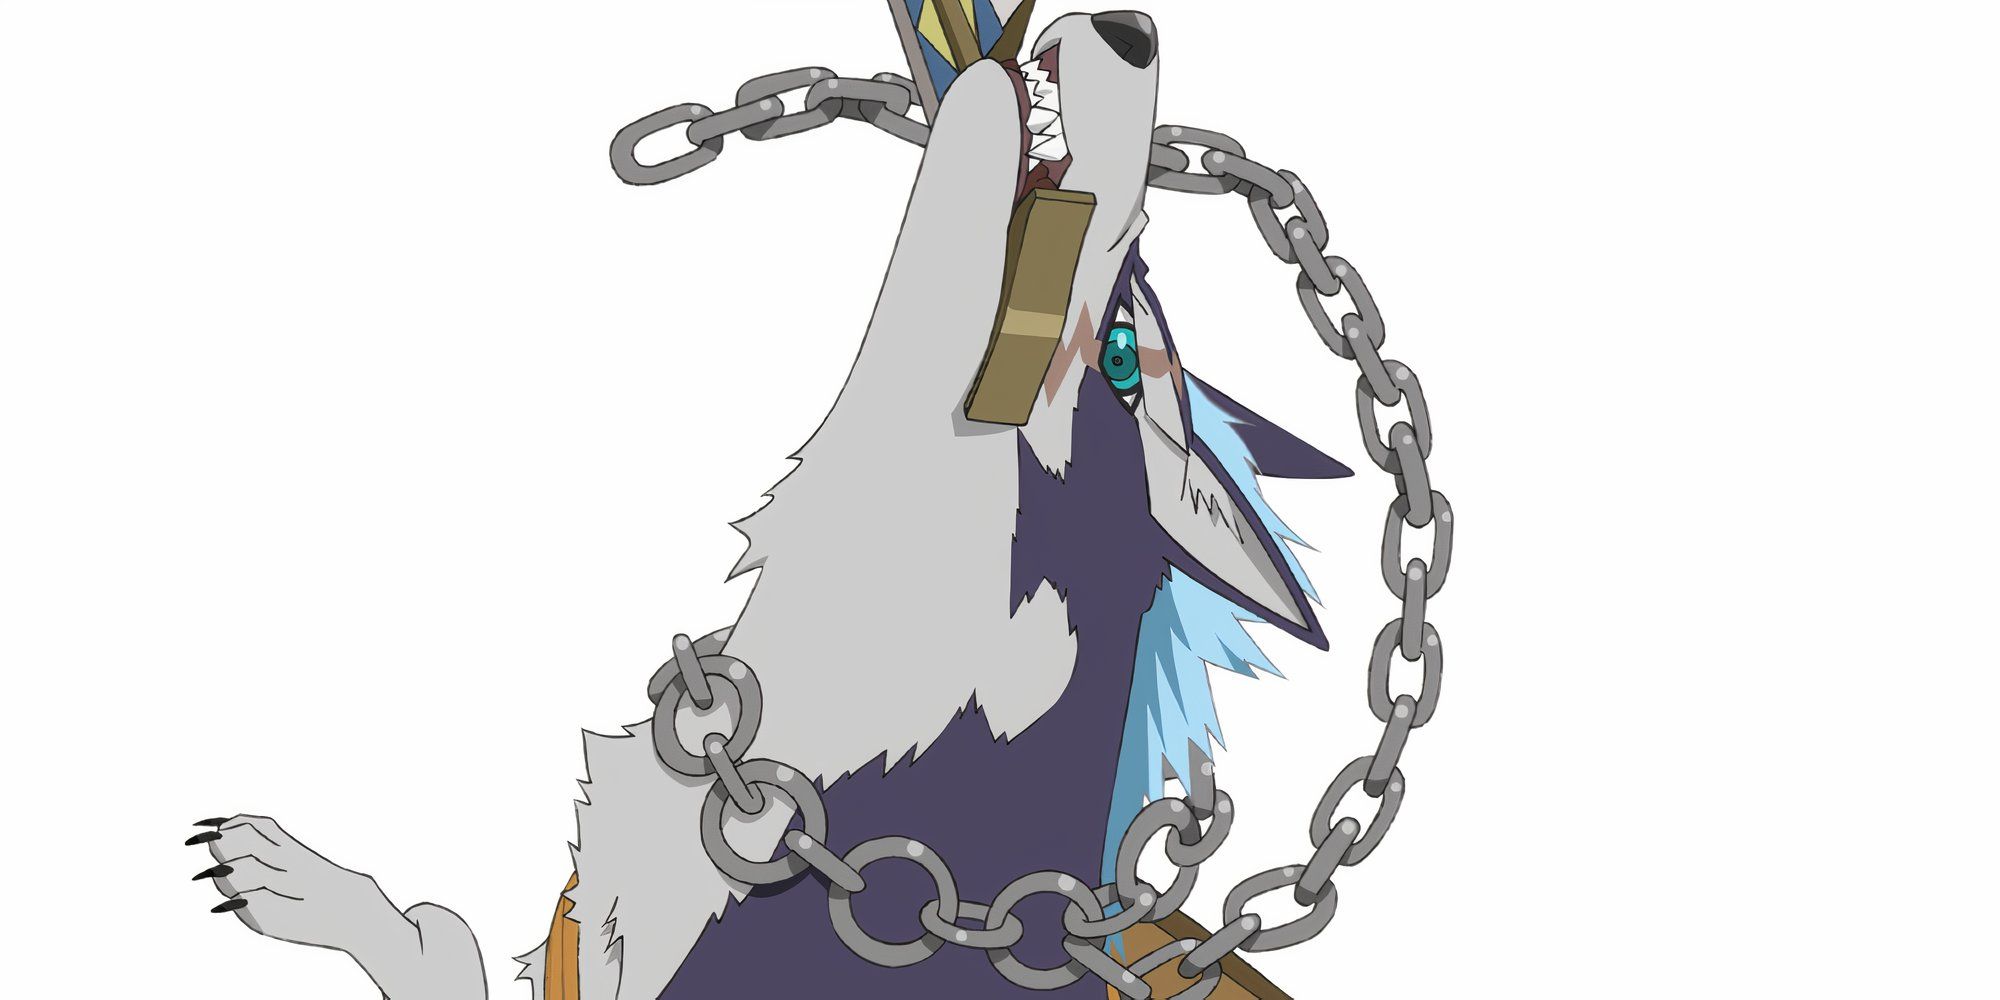 Artwork of Repede from Tales of Vesperia